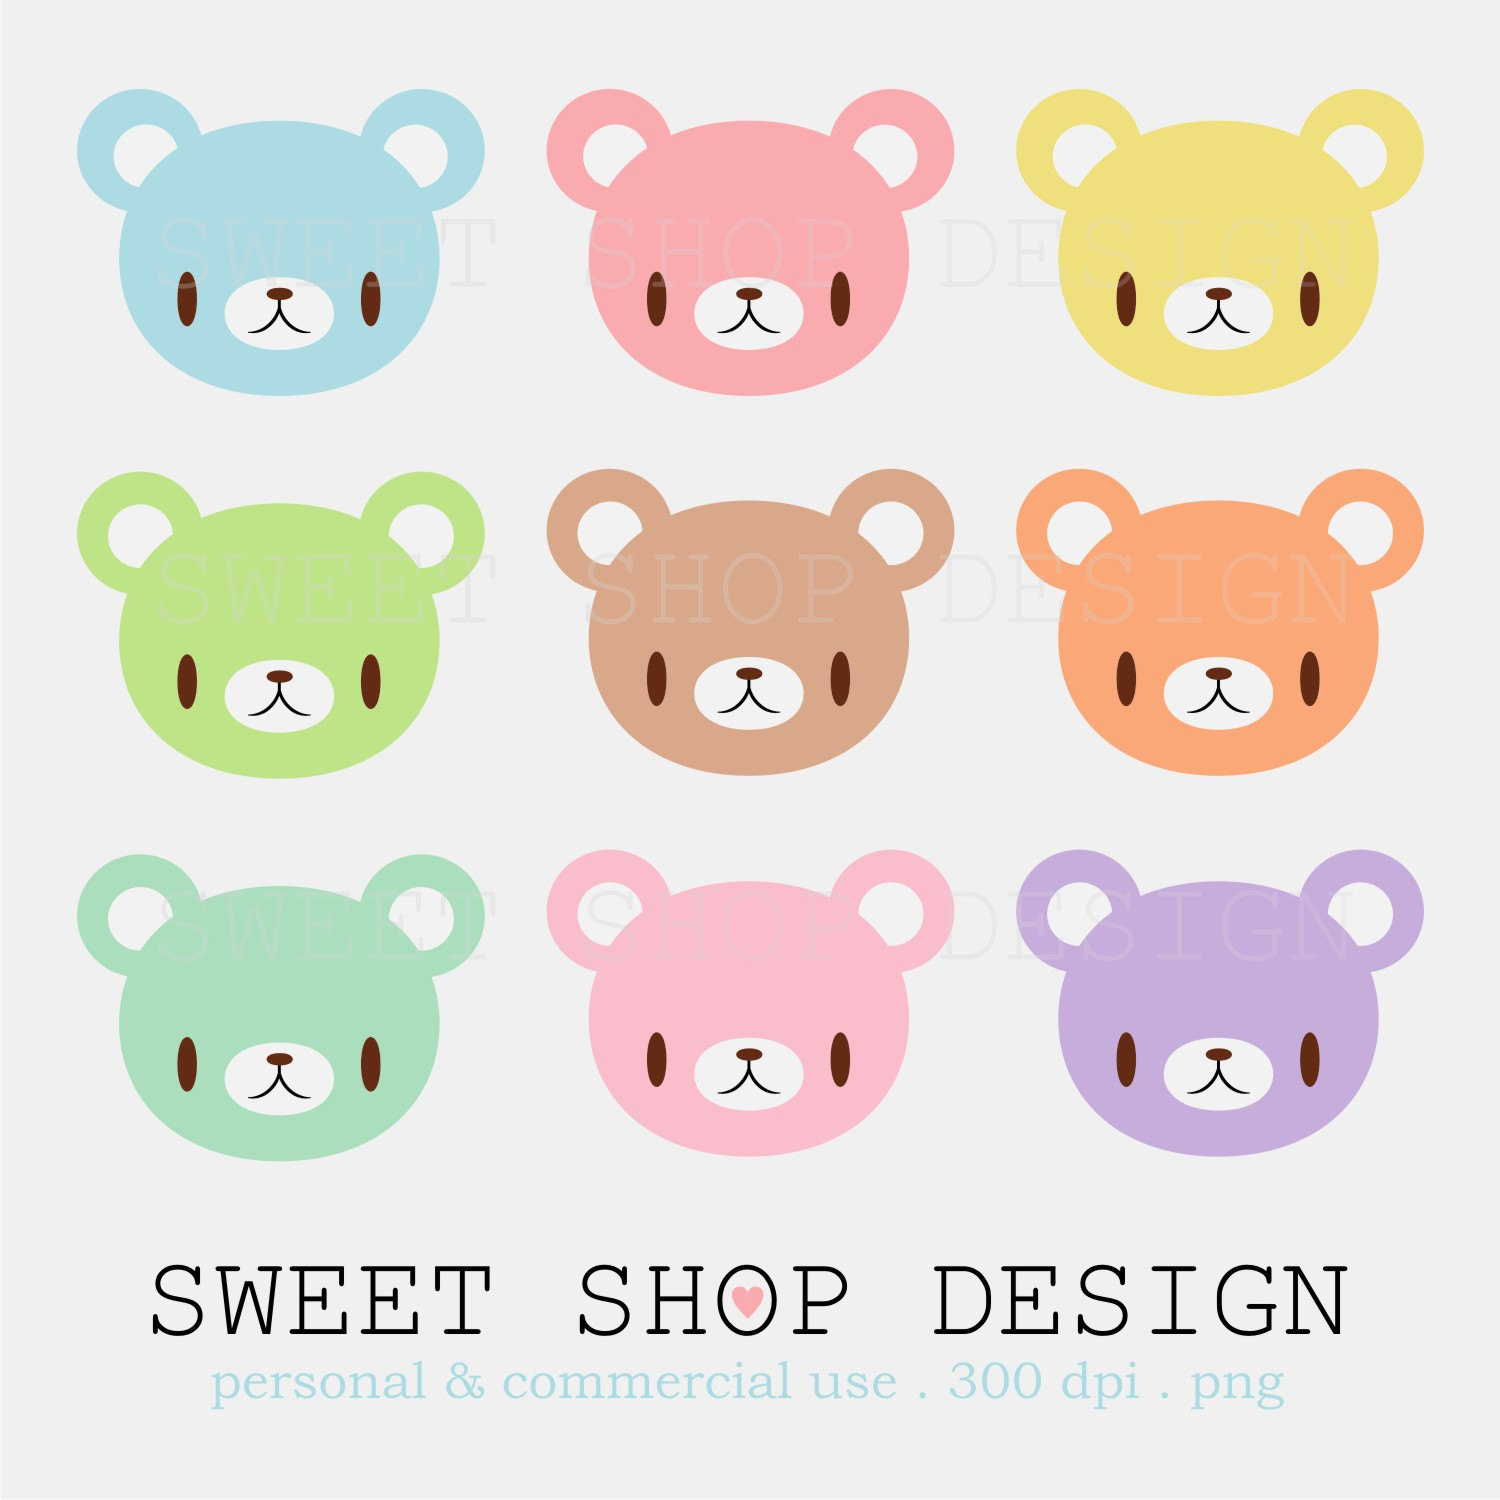 Cute Bear Clip Art Animal Clip Art Baby Shower by SweetShopDesign